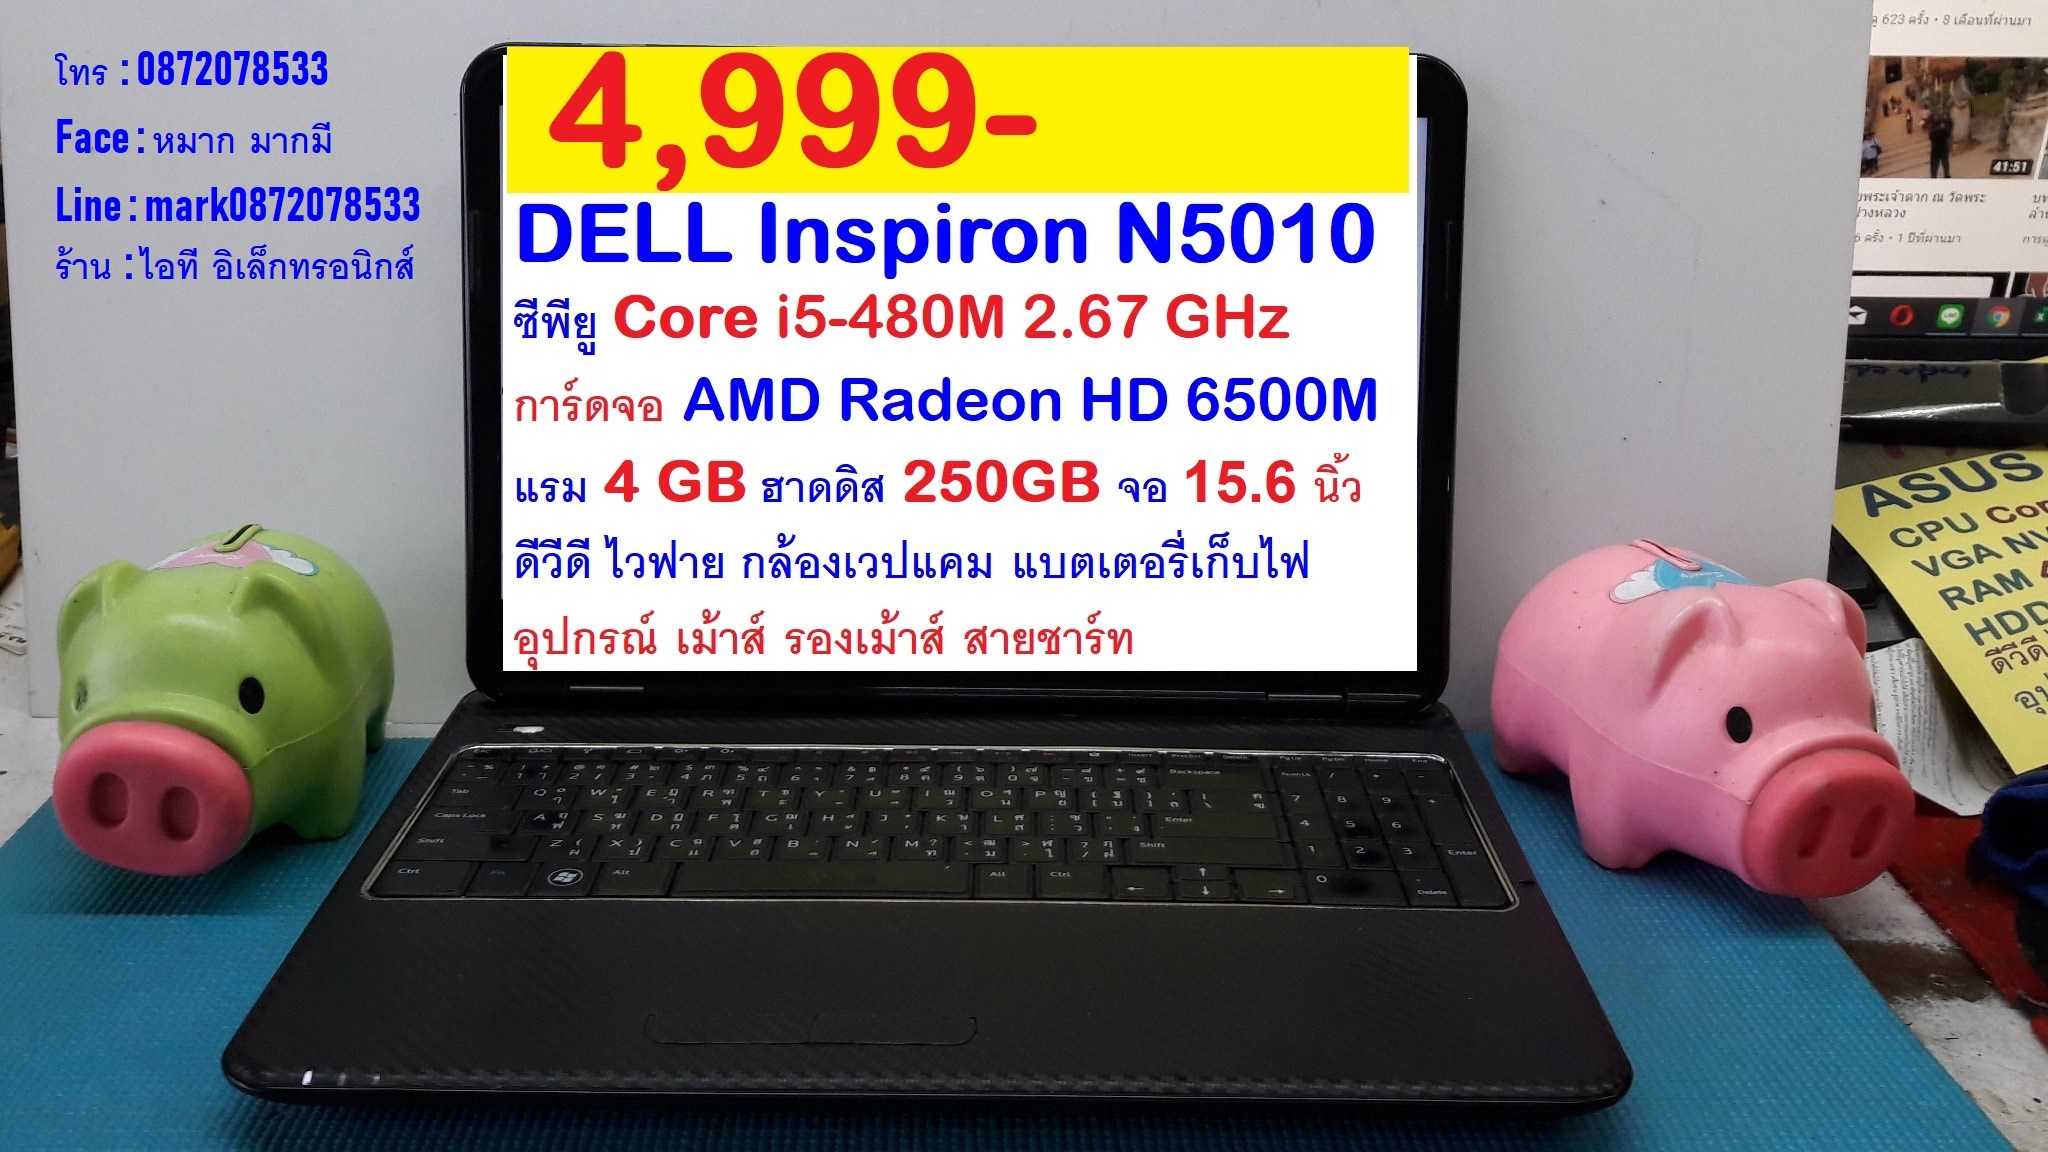 DELL Inspiron N5010 รูปที่ 1